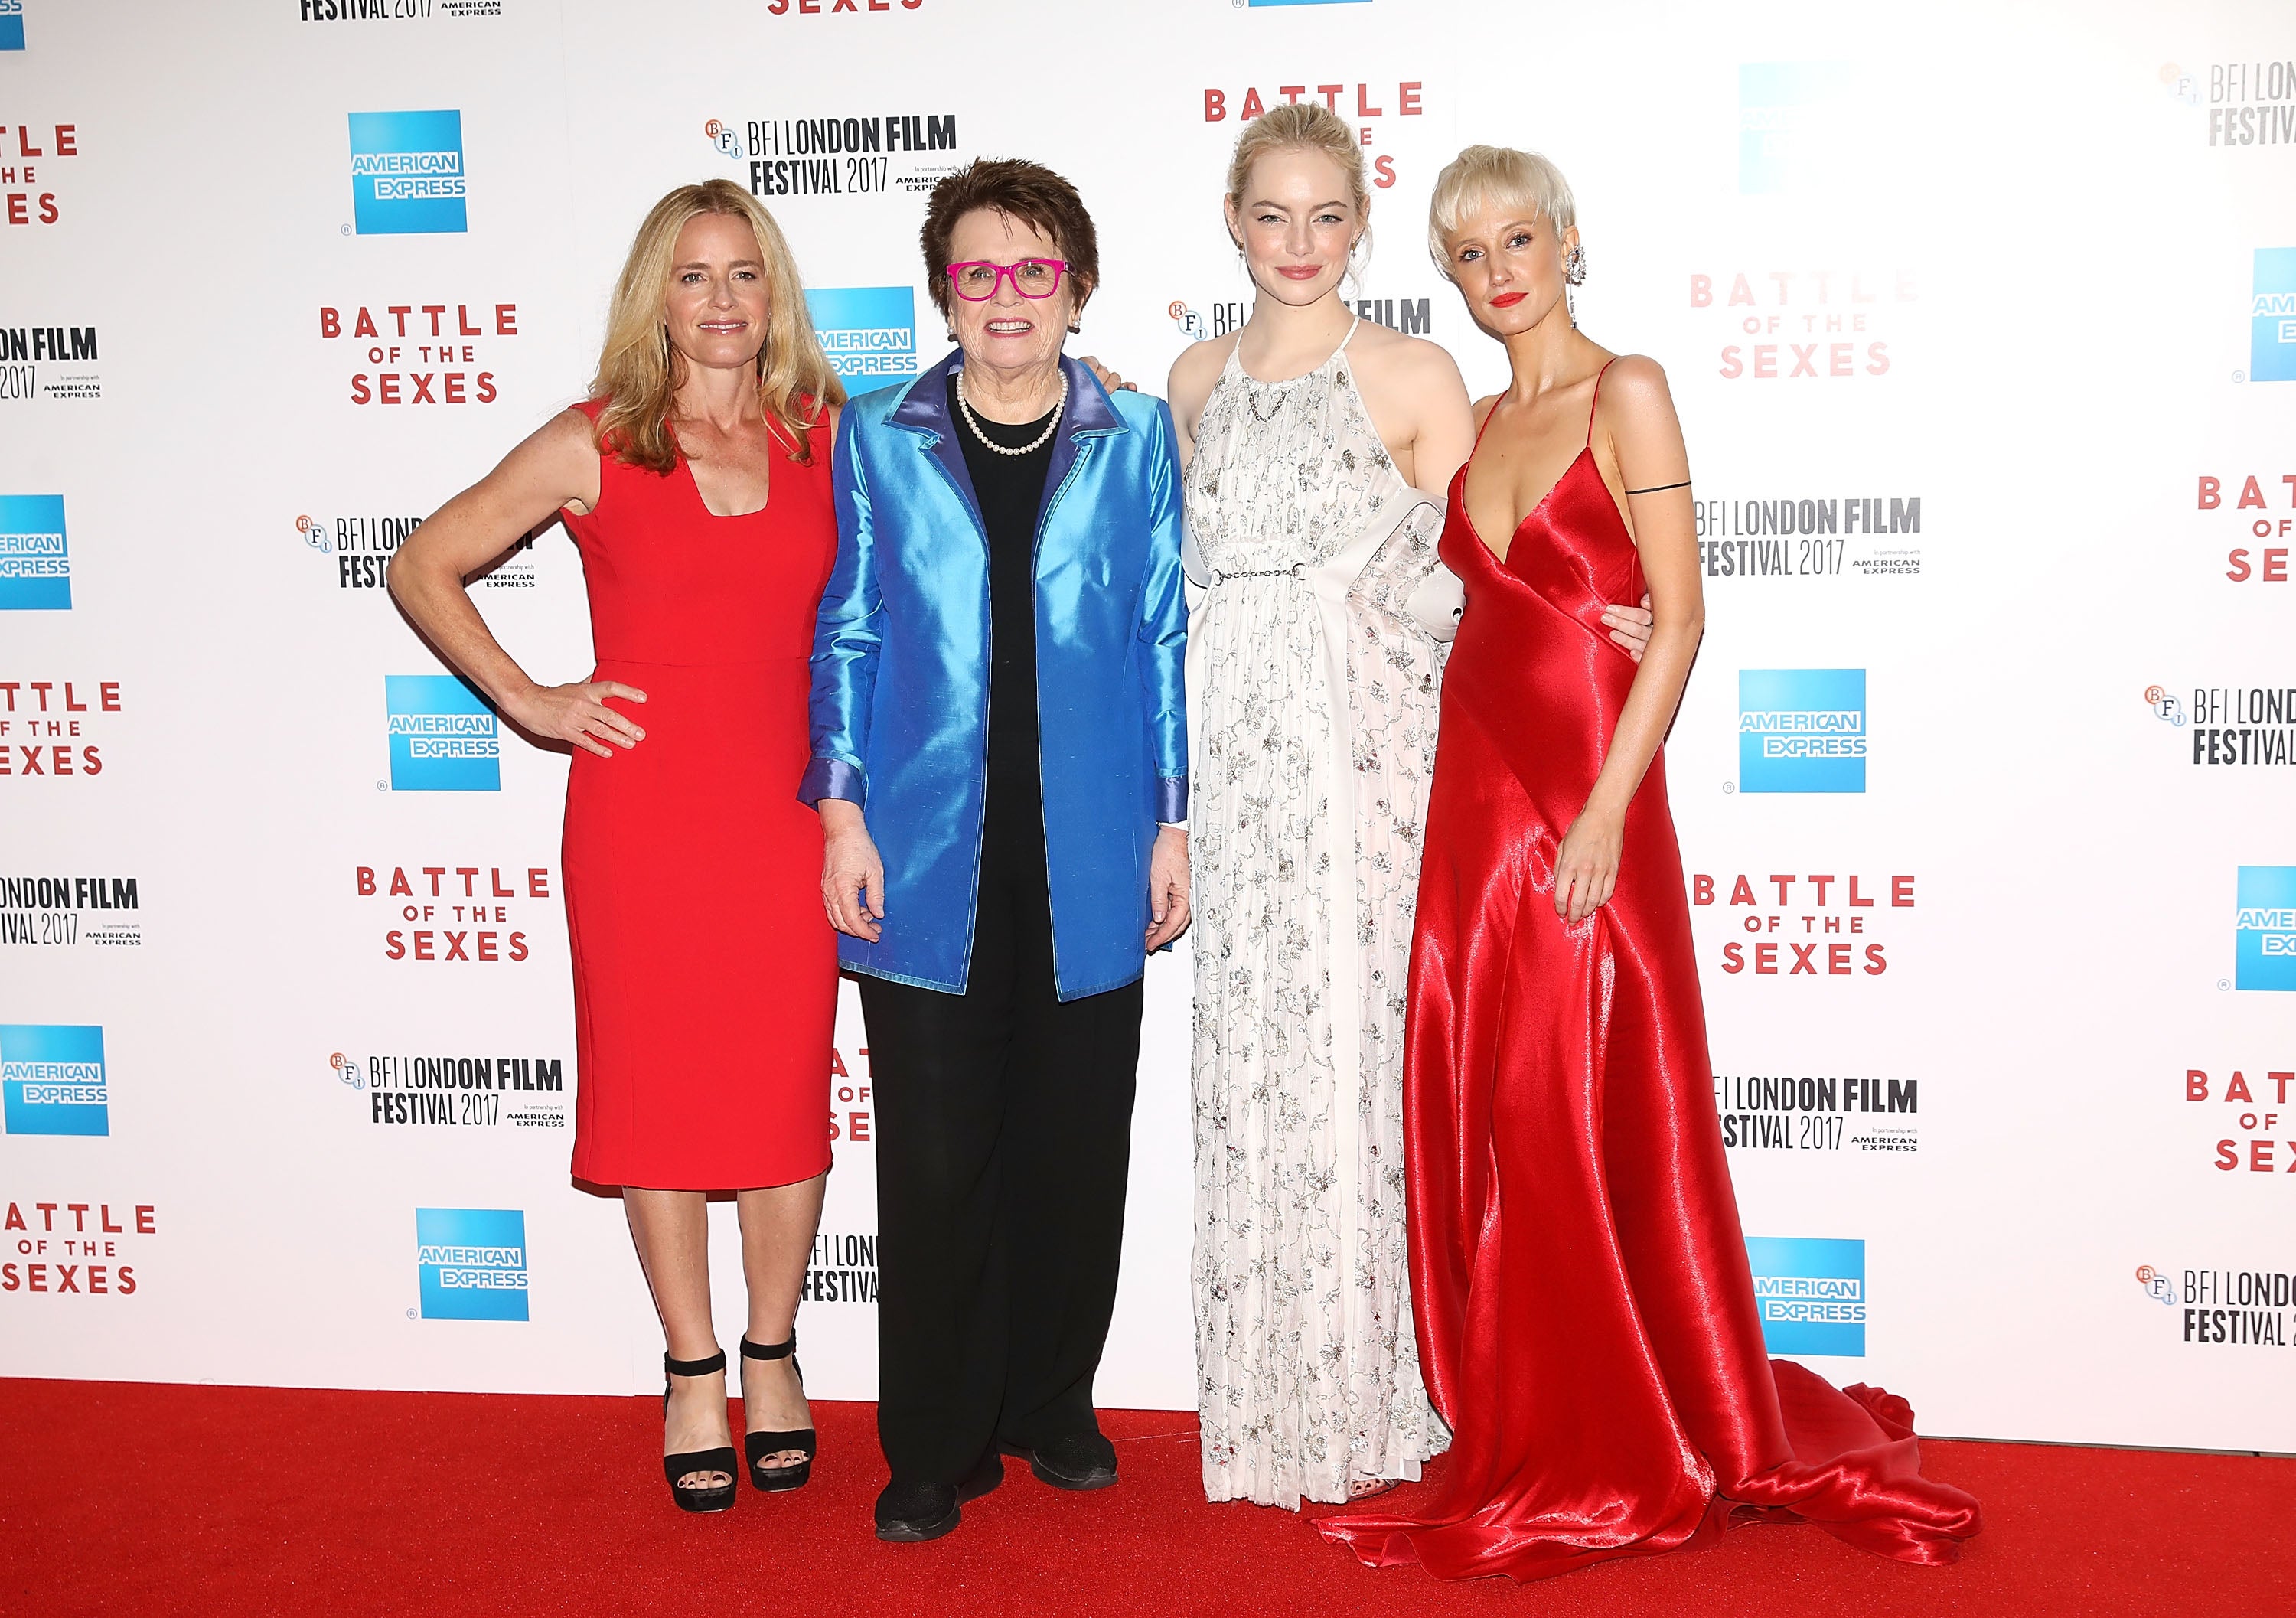 Billie Jean King and Emma Stone at Battle of the Sexes European Premiere